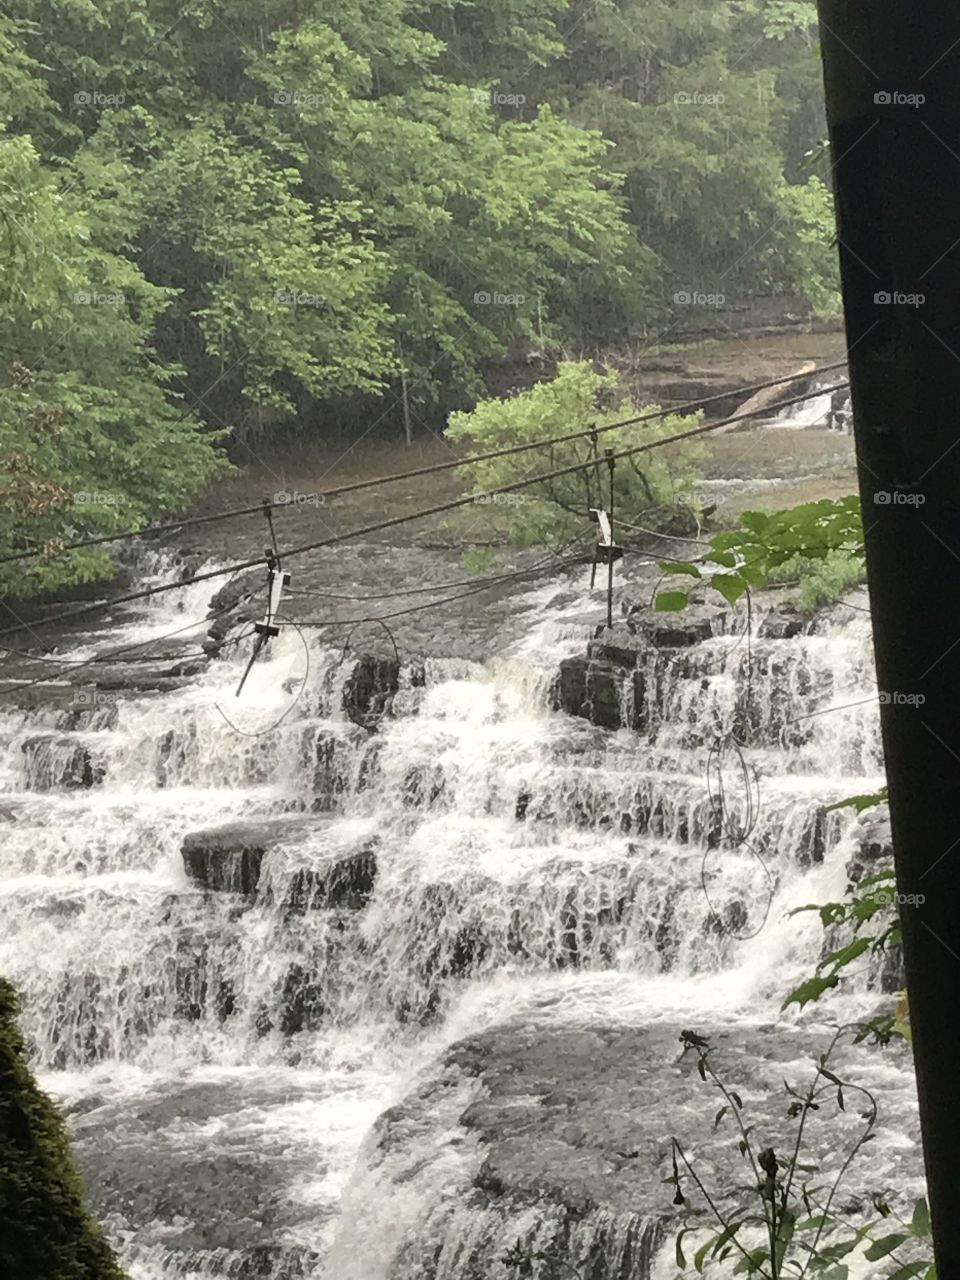 Burgess falls in Tennessee, lovely nature view from the perspective of the hiking trail along side this breath taking waterfall